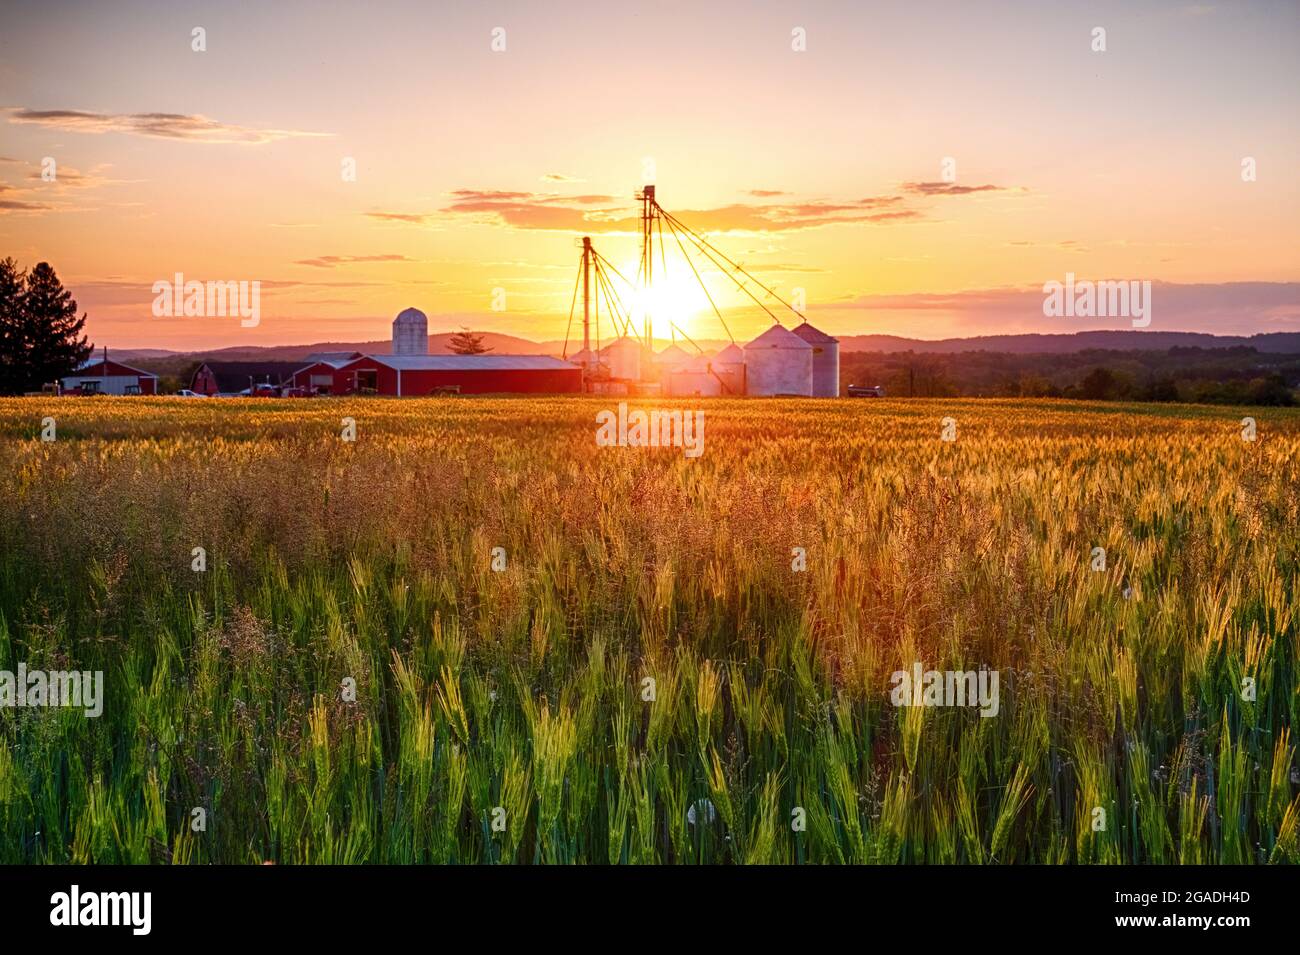 Farm with Grain Silos whith a Wheat Filed at Sunset, Frenchtown, Hunterdon County, New Jersey Stock Photo